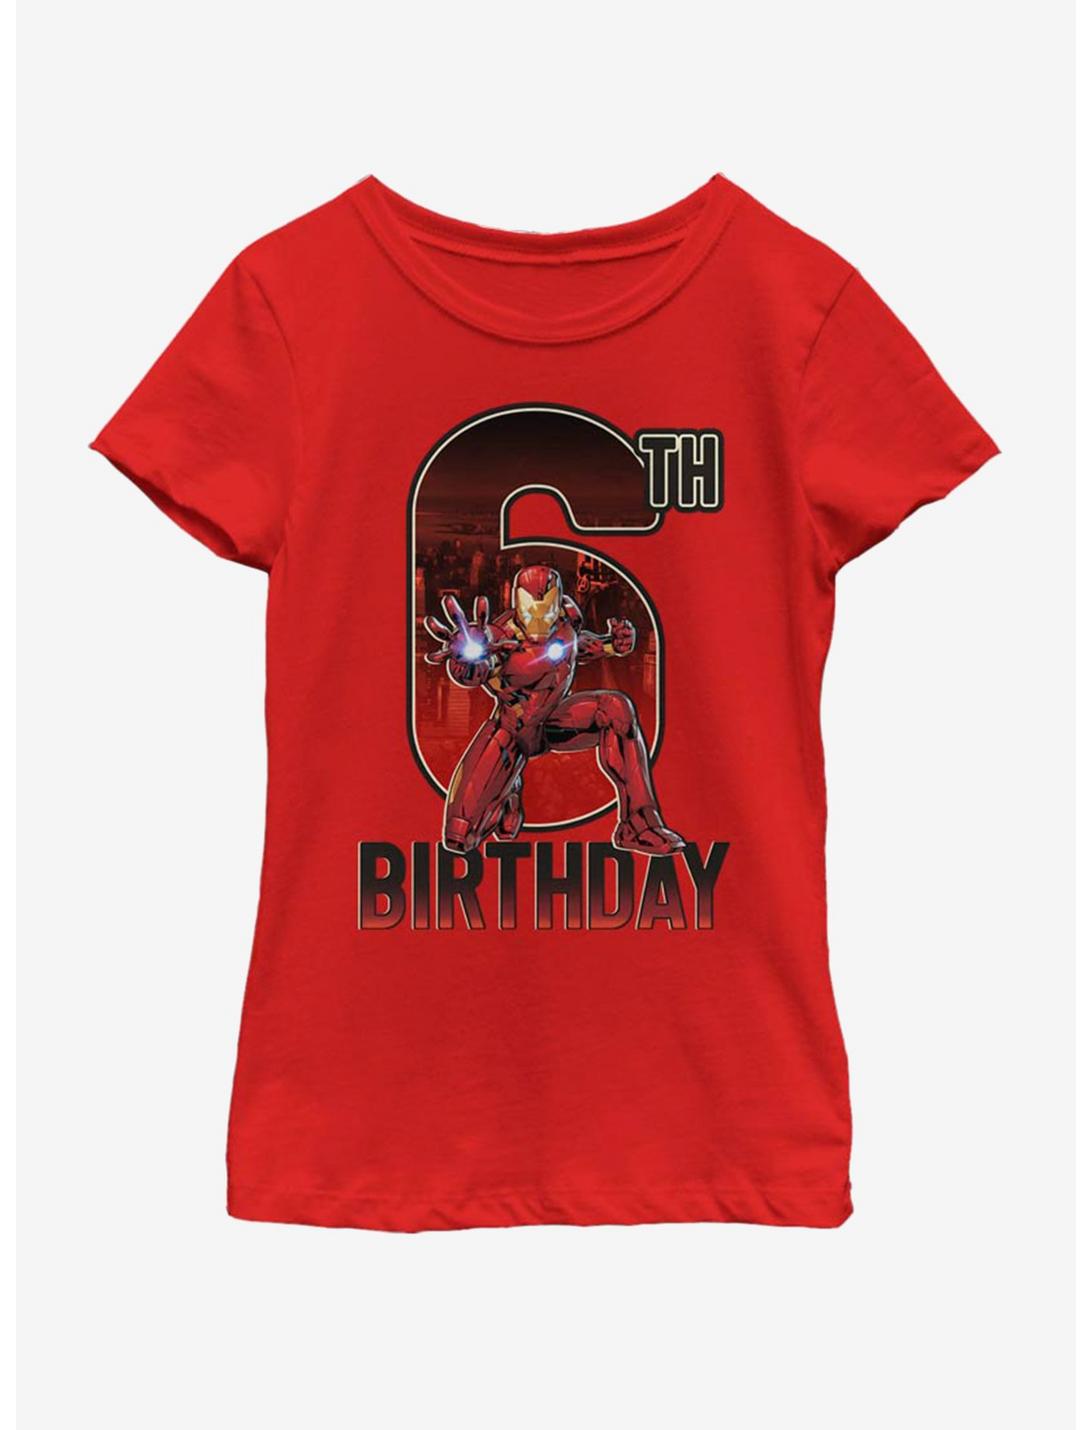 Marvel Ironman 6th Bday Youth Girls T-Shirt, RED, hi-res